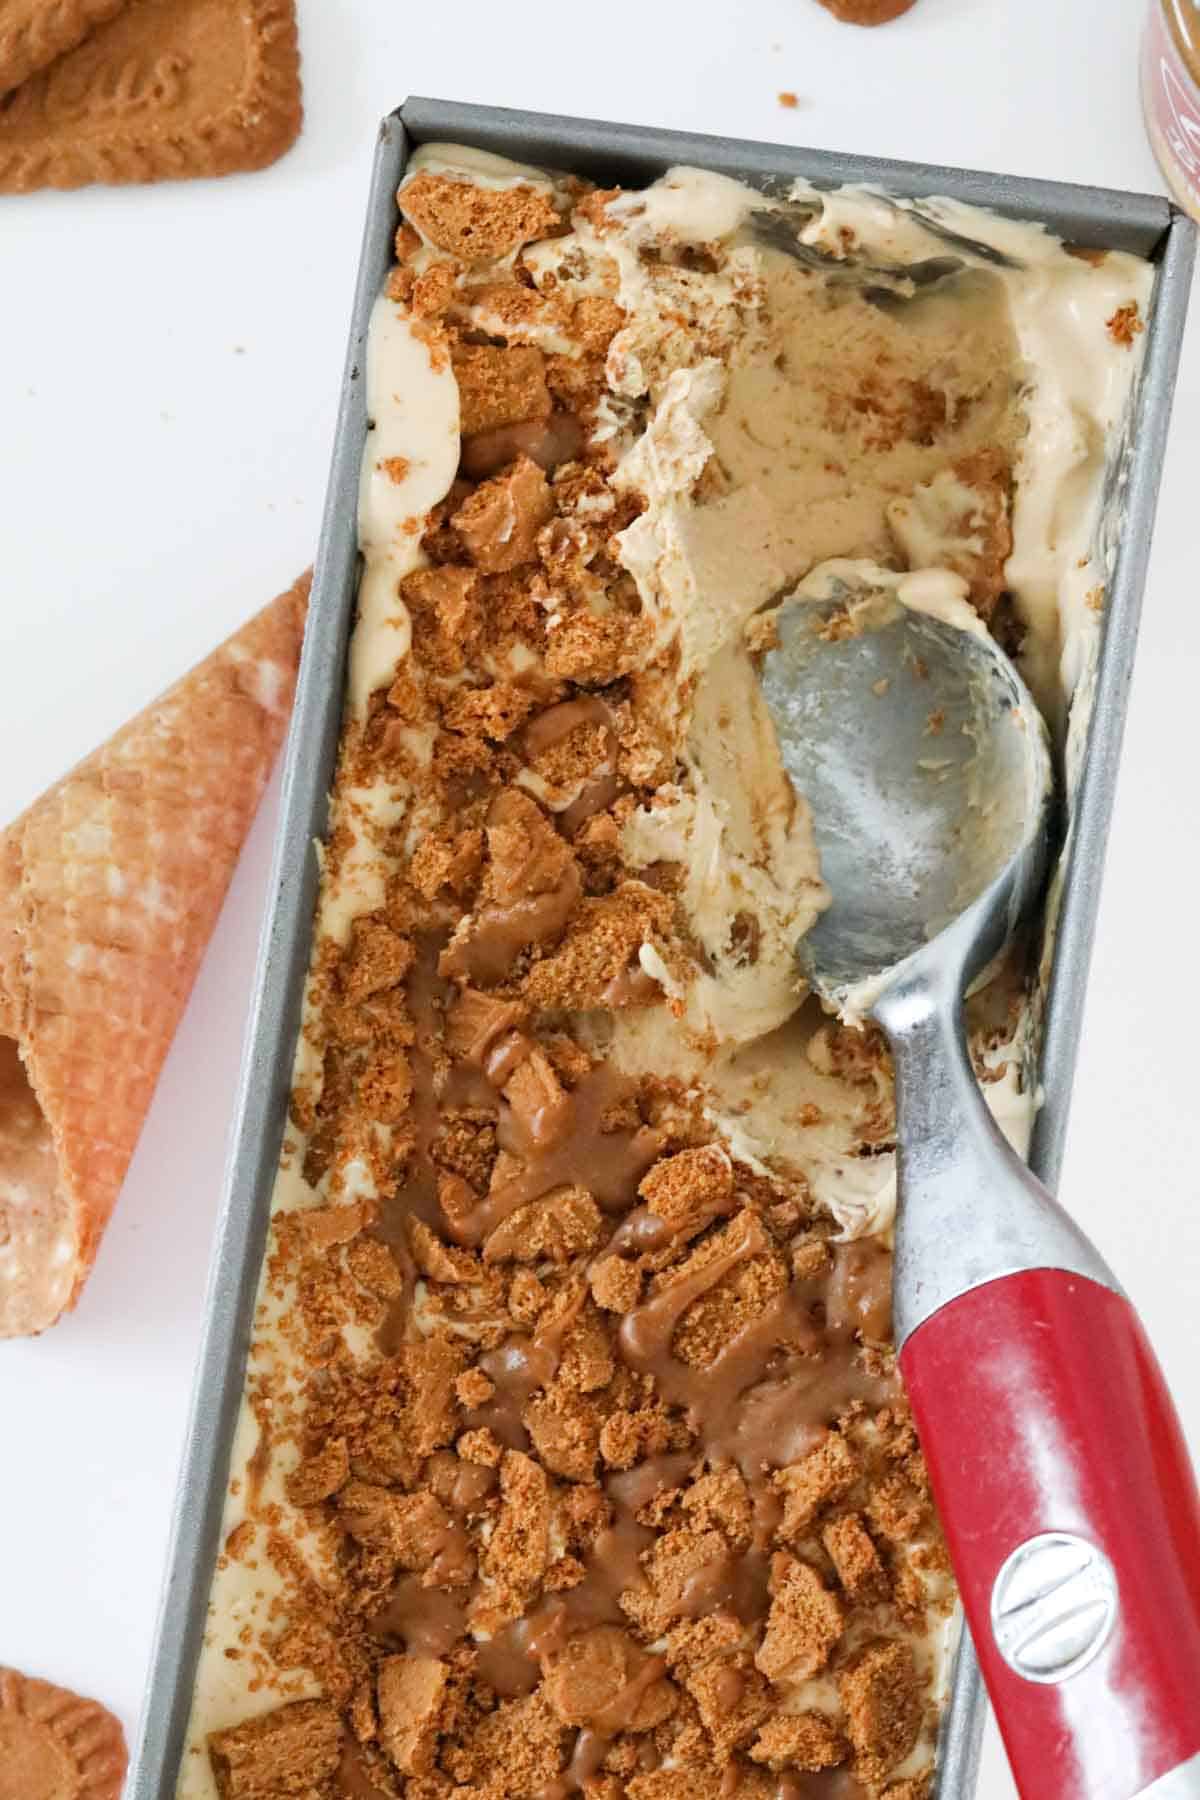 An ice cream scoop in a tray of Biscoff Ice Cream.